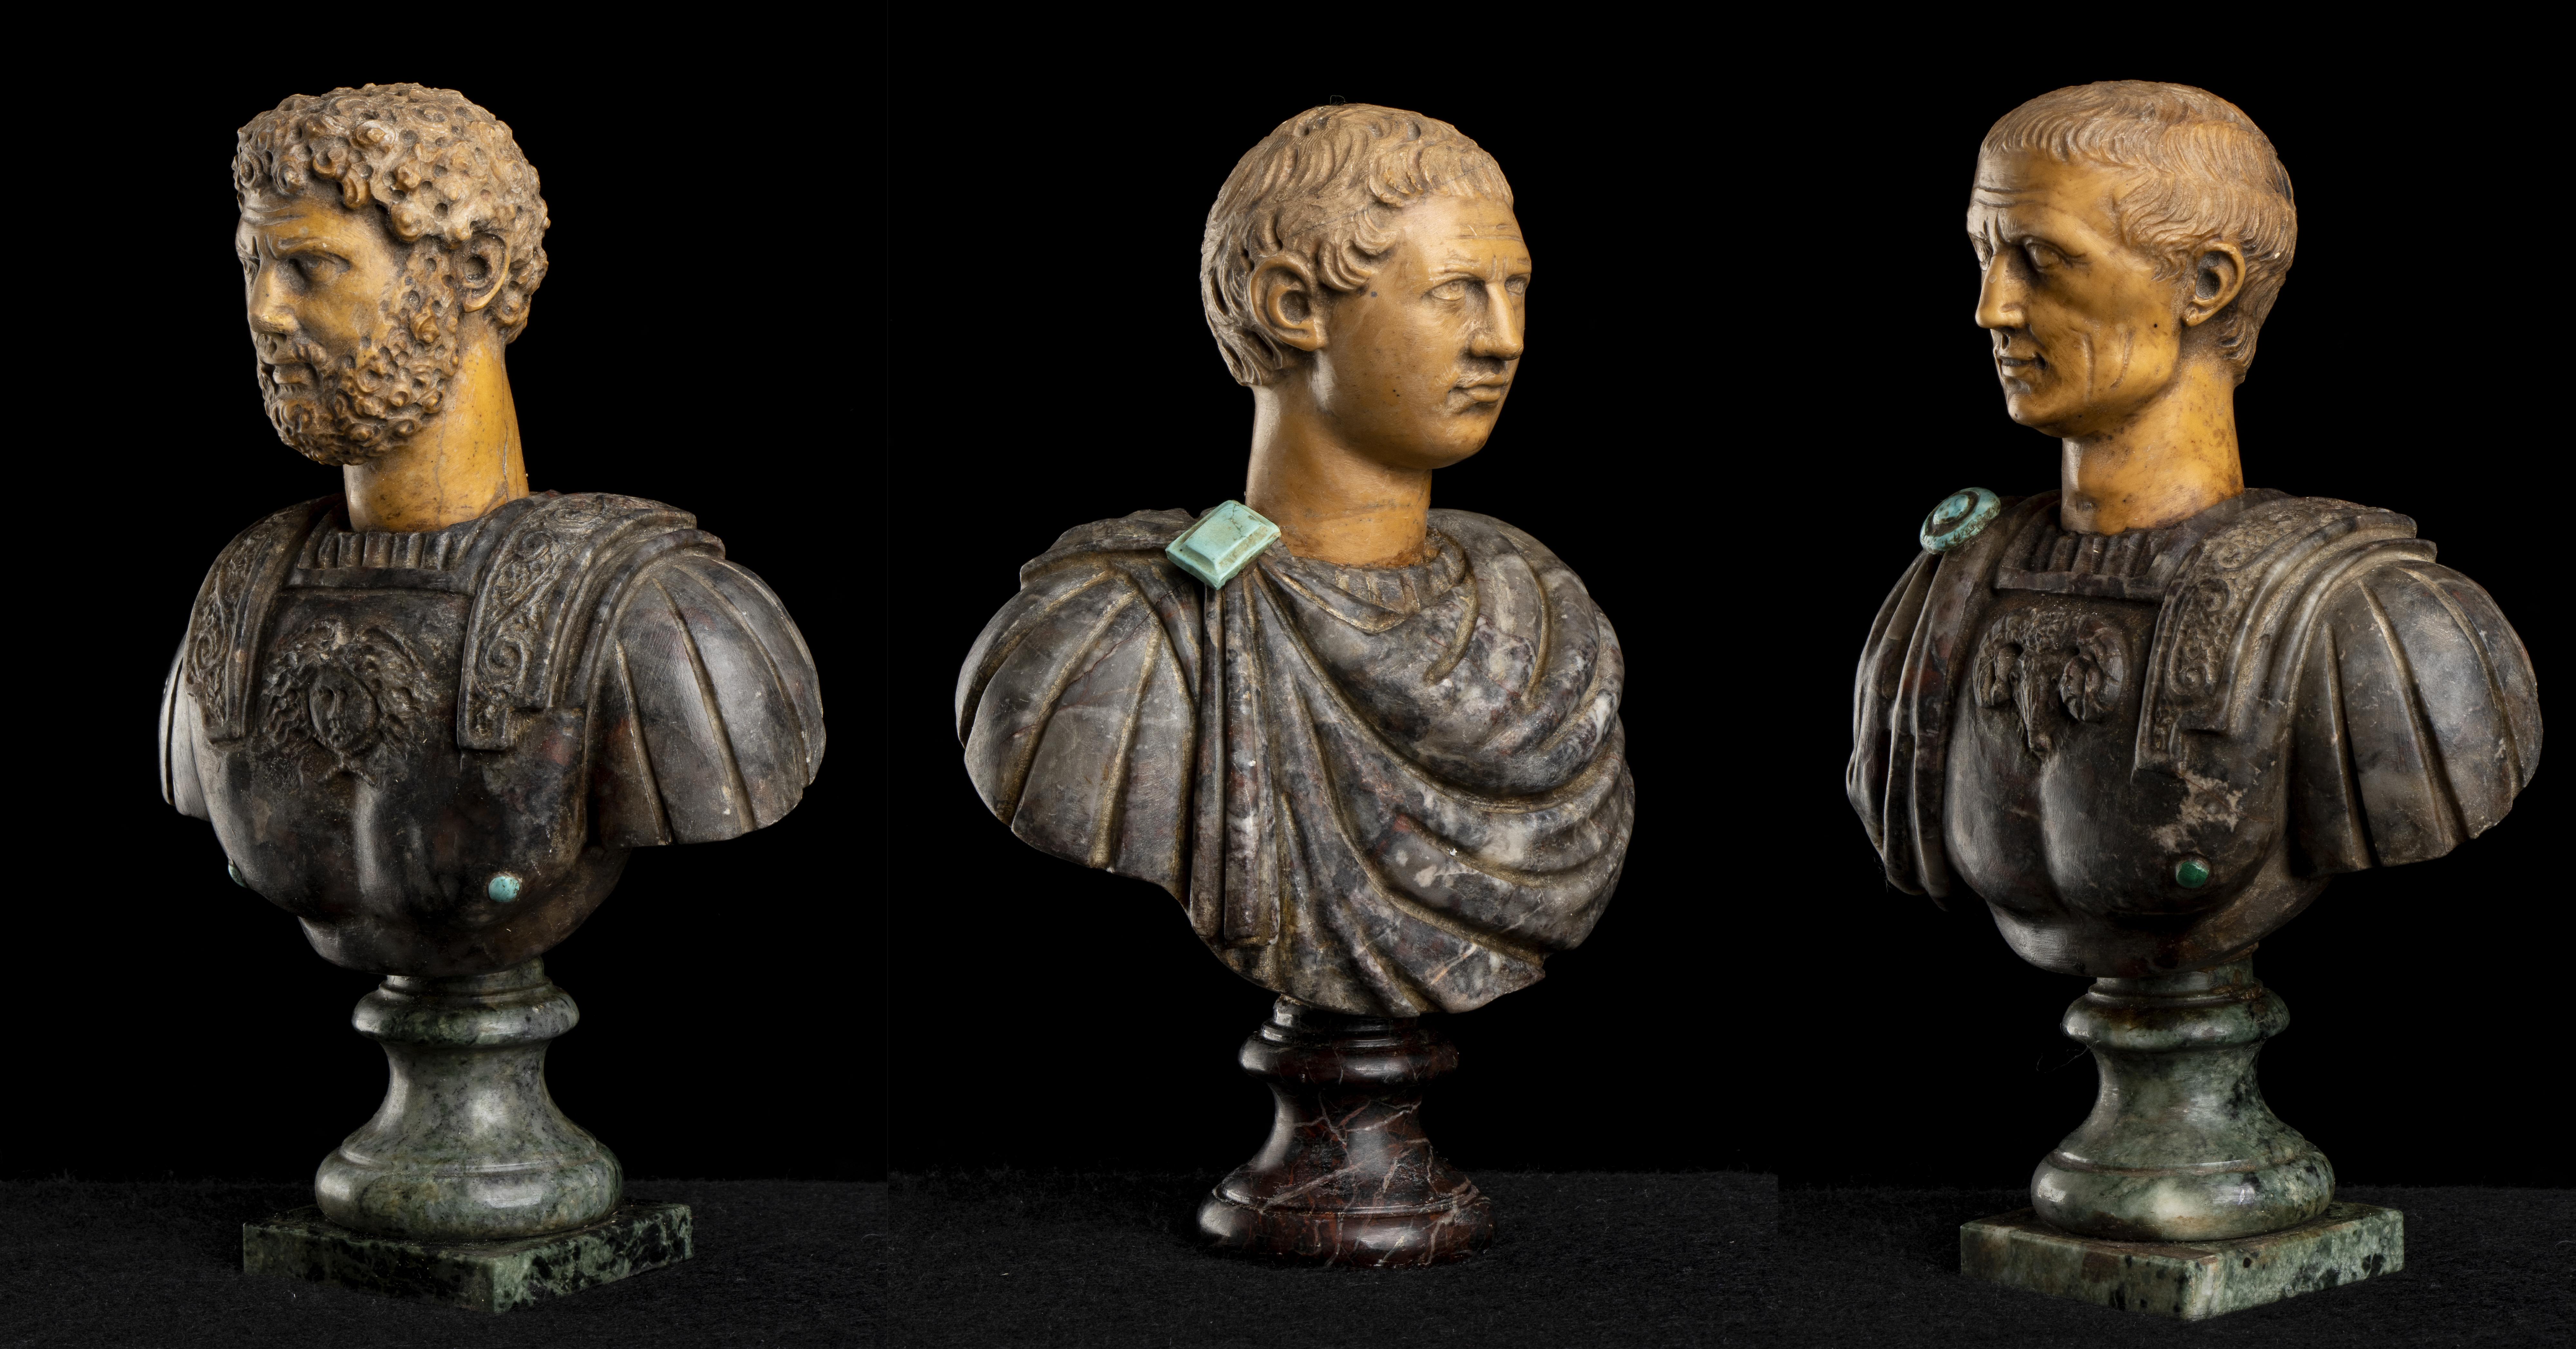 A very interesting Italian polychrome marble set of three sculptures busts of roman emperors Hadrian and Tiberius and of Julius Caesar Grand Tour. The marbles used are specimen and rare marbles, the head in Giallo antico latin name "Marmor